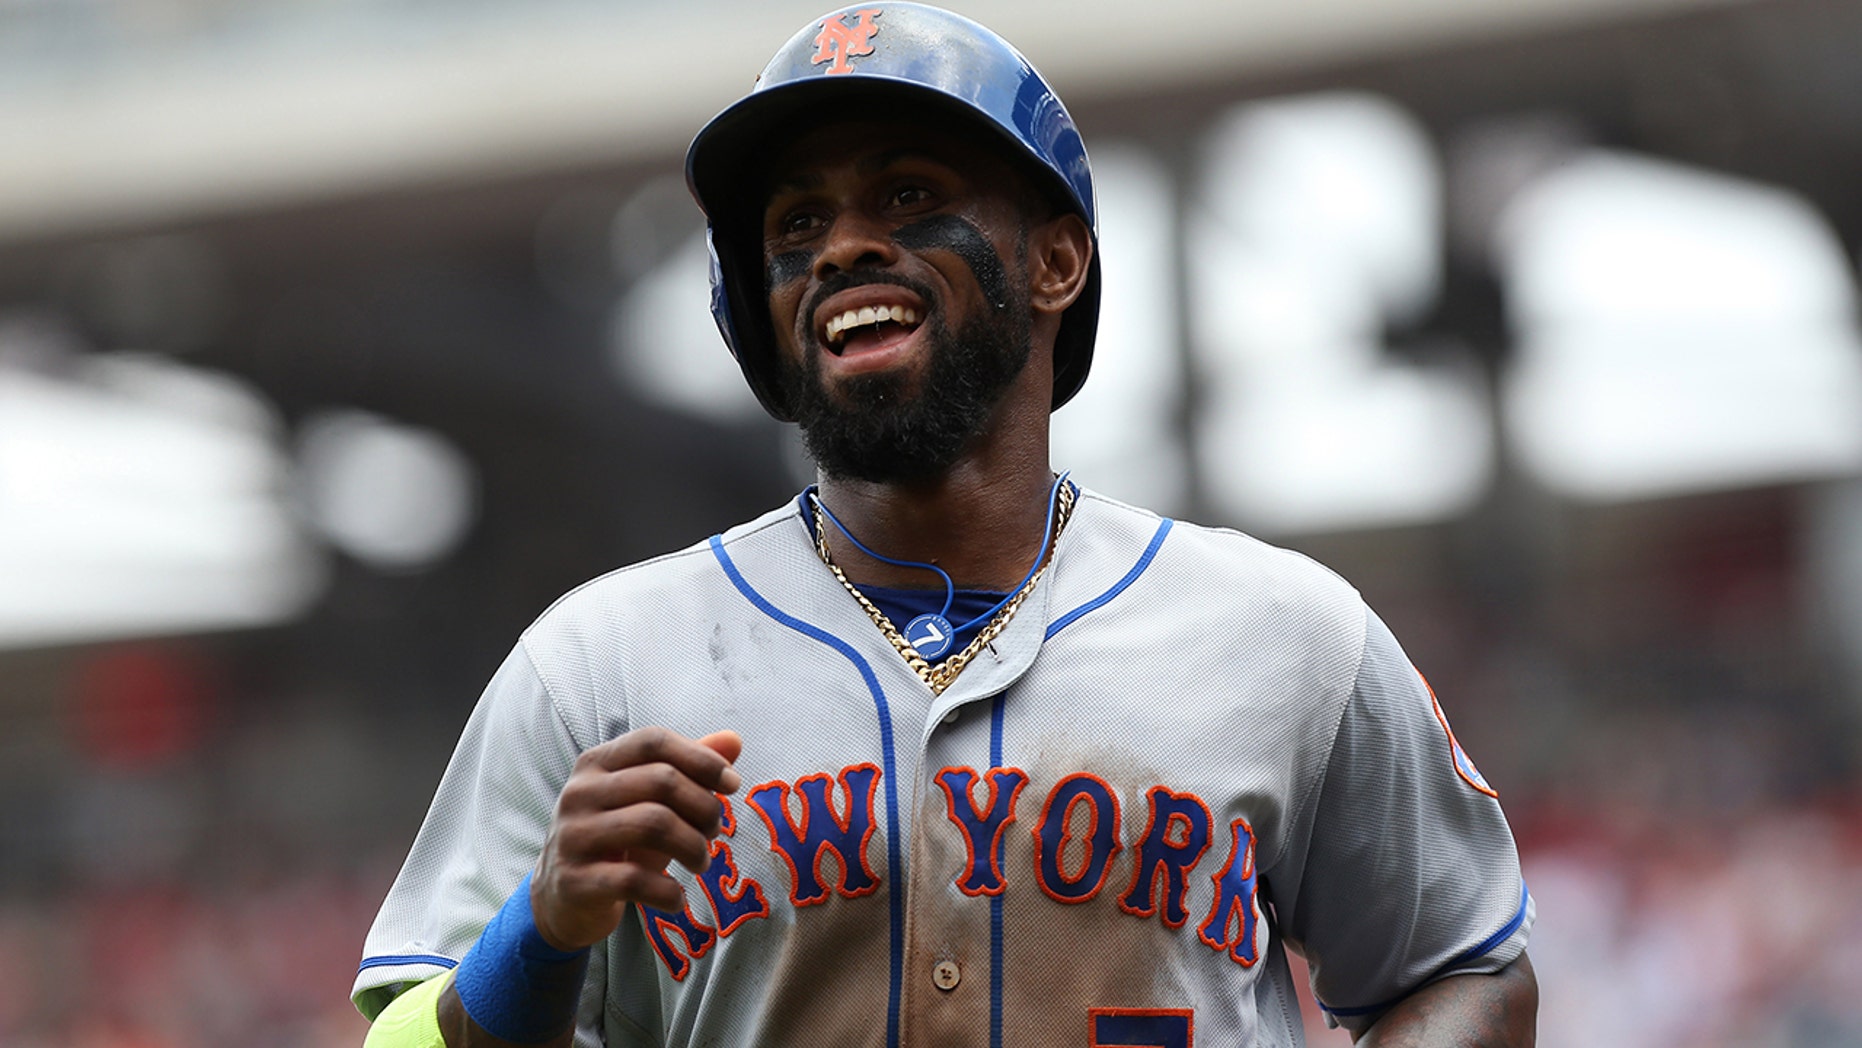 NY Mets' Jose Reyes and his wife thankful to now be US citizens | Fox News